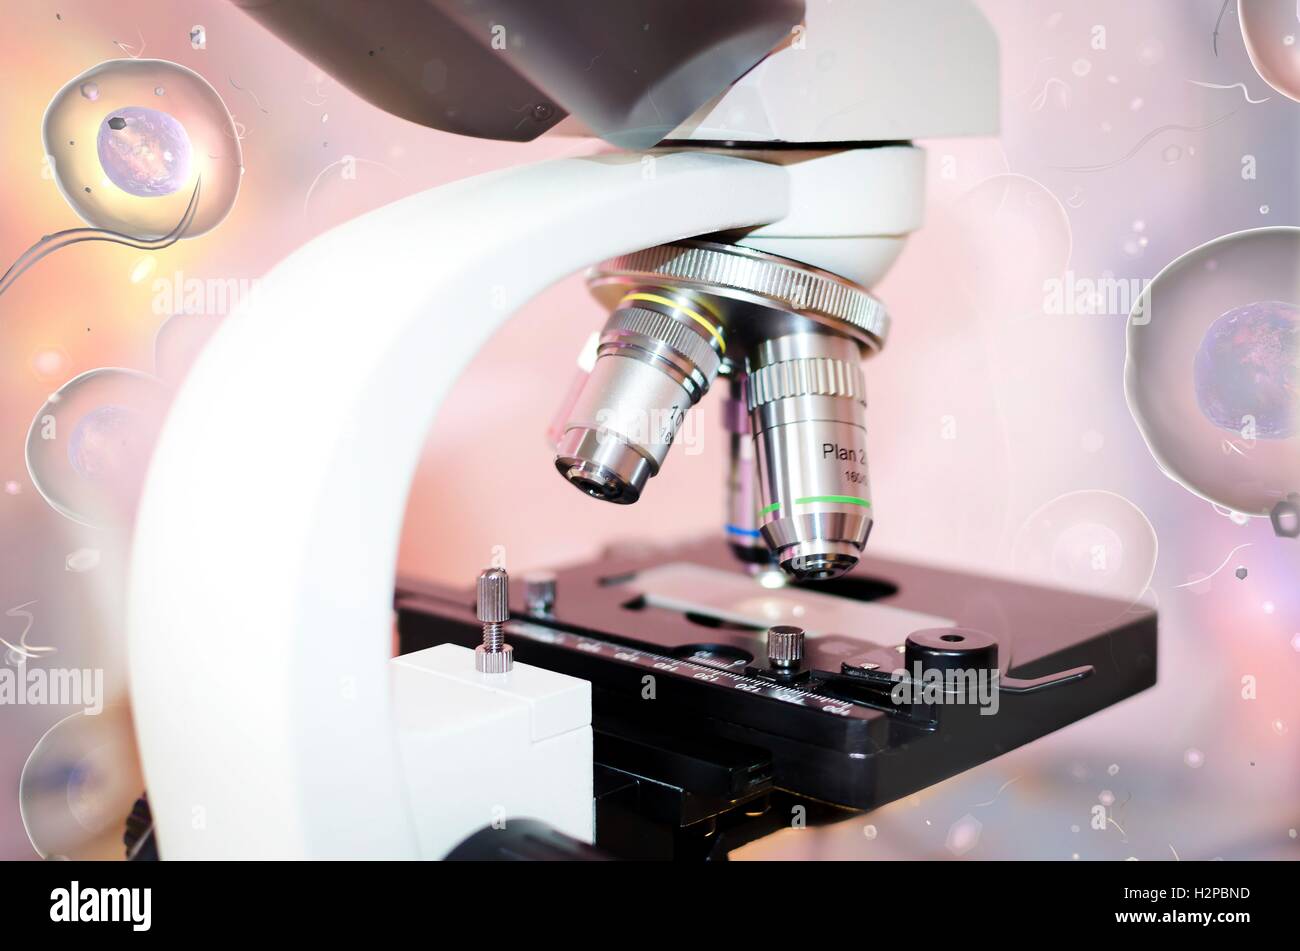 Microscope and human cells, computer illustration. Stock Photo